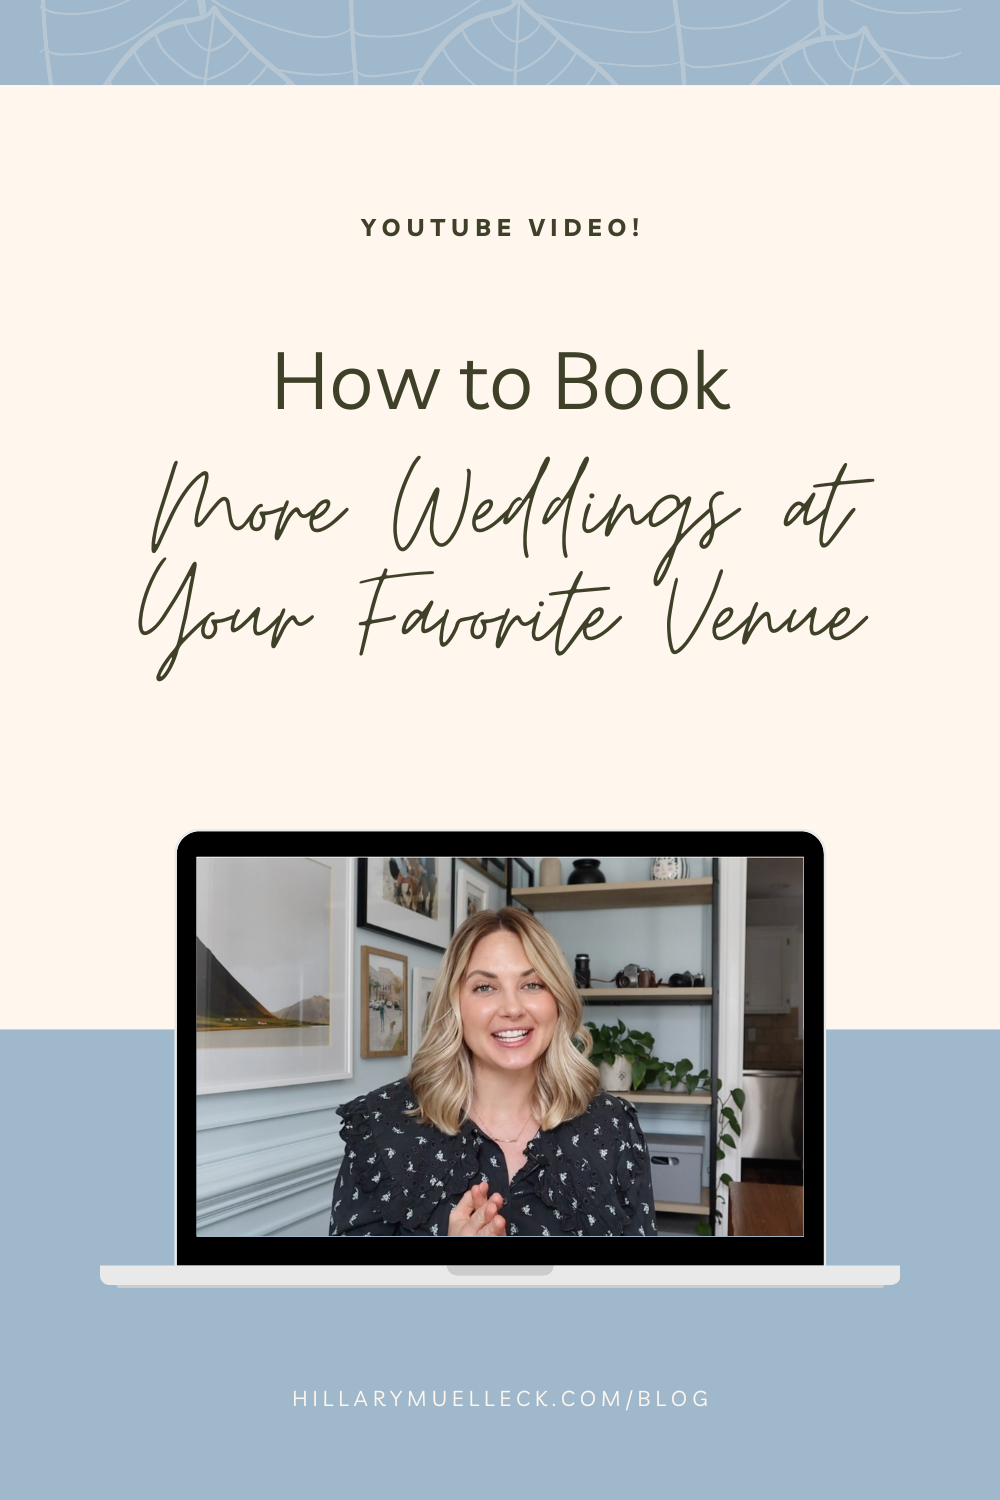 How to get more inquiries for your favorite venues as a wedding photographer: NC wedding photographer Hillary Muelleck shares an easy tip